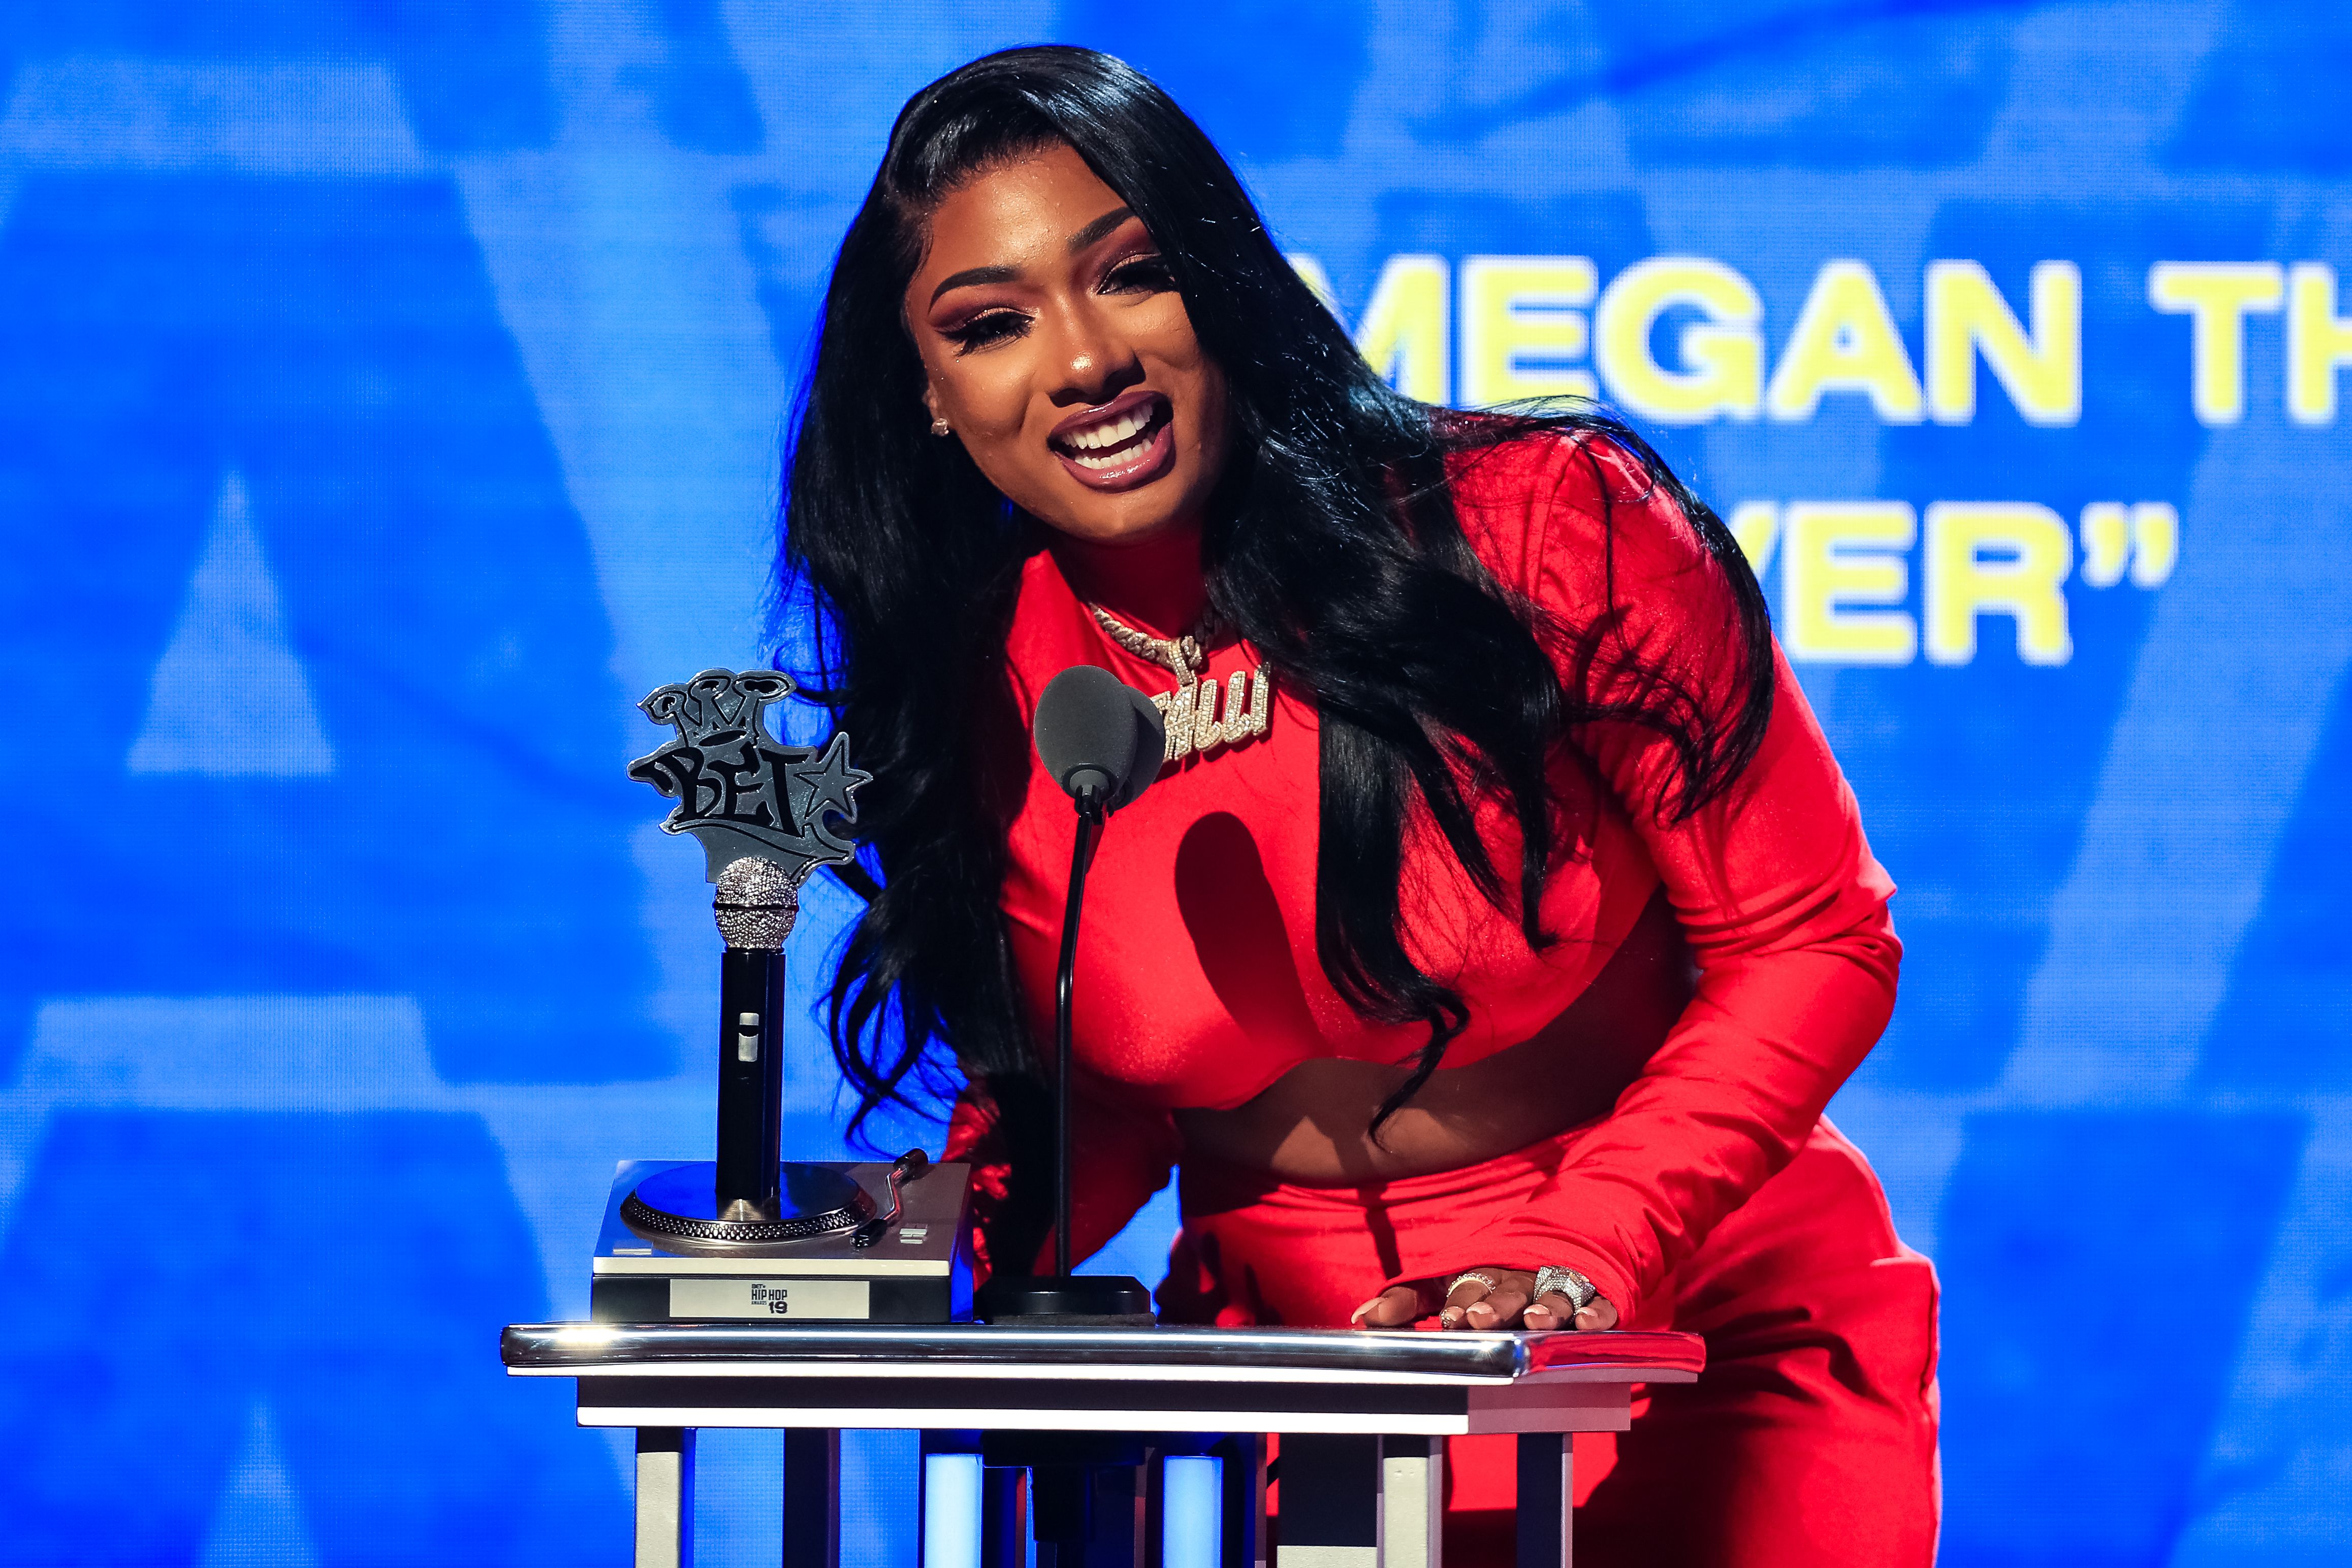 Rapper Megan Thee Stallion talking on stage at the BET Hip Hop Awards 2019 on October 5, 2019 in Georgia. | Photo: Getty Images.